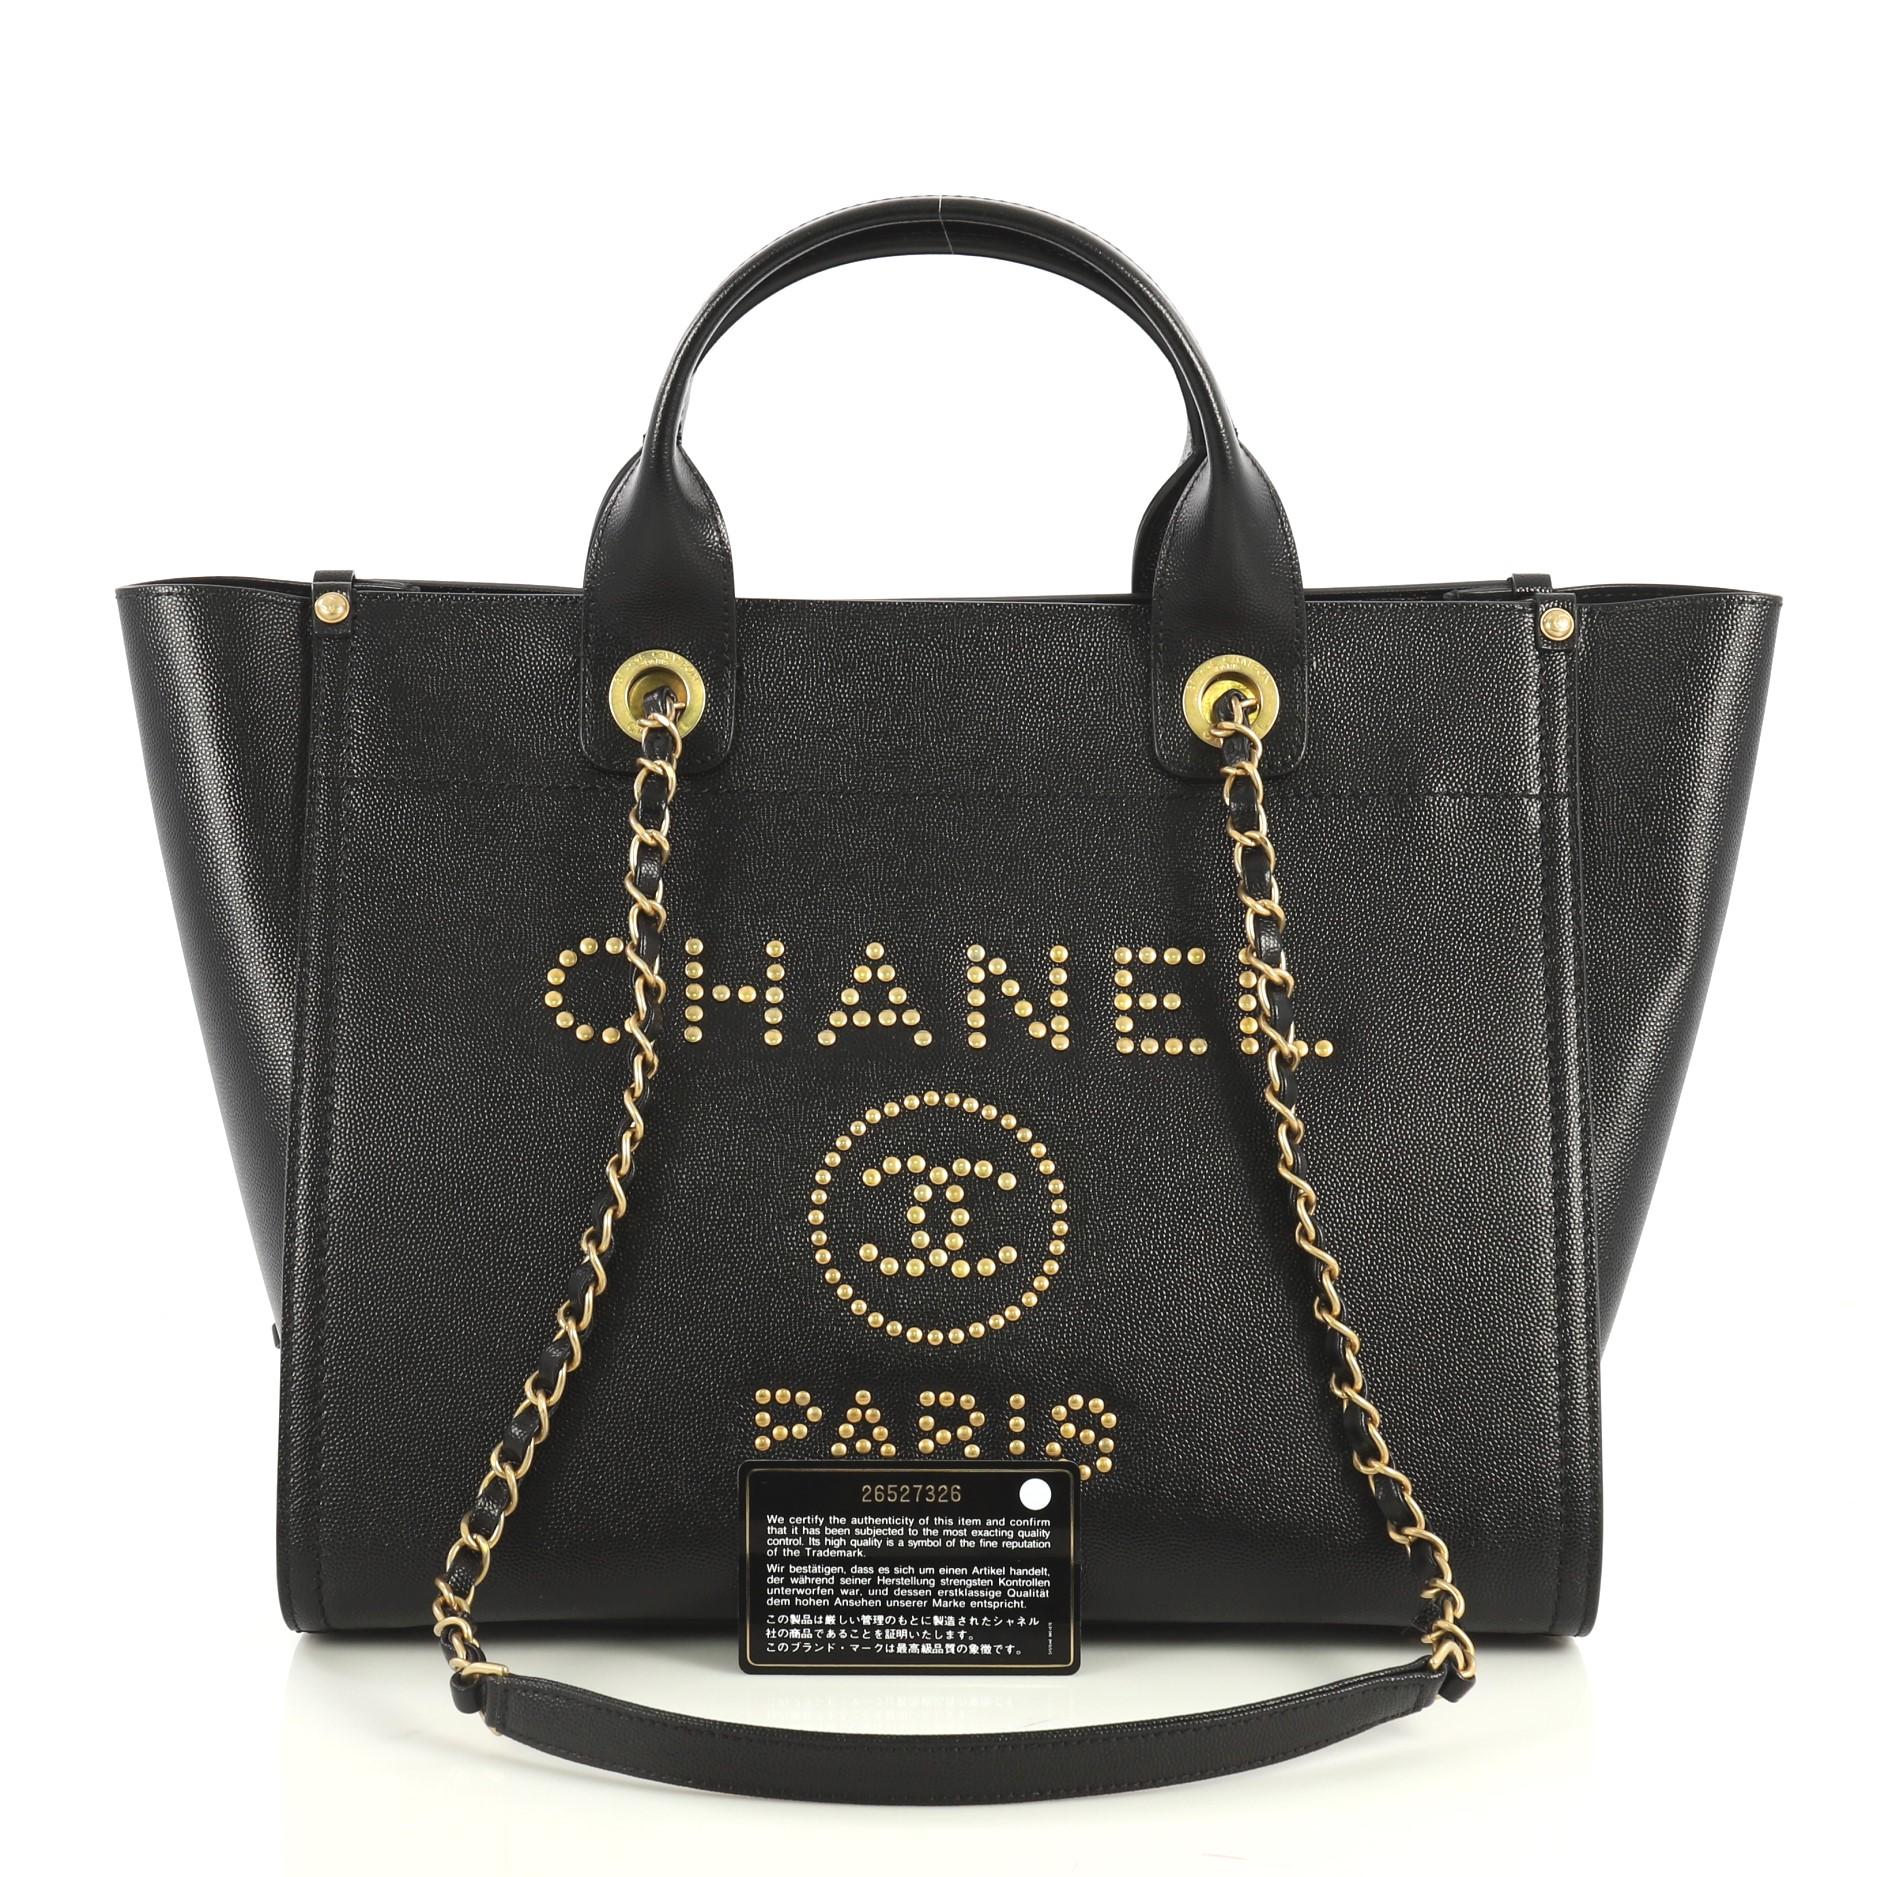 This Chanel Deauville Tote Studded Caviar Small, crafted in black studded caviar leather, features dual woven-in leather chain straps, dual top handles, studded logo at the front, and aged gold-tone hardware. Its magnetic snap closure opens to a